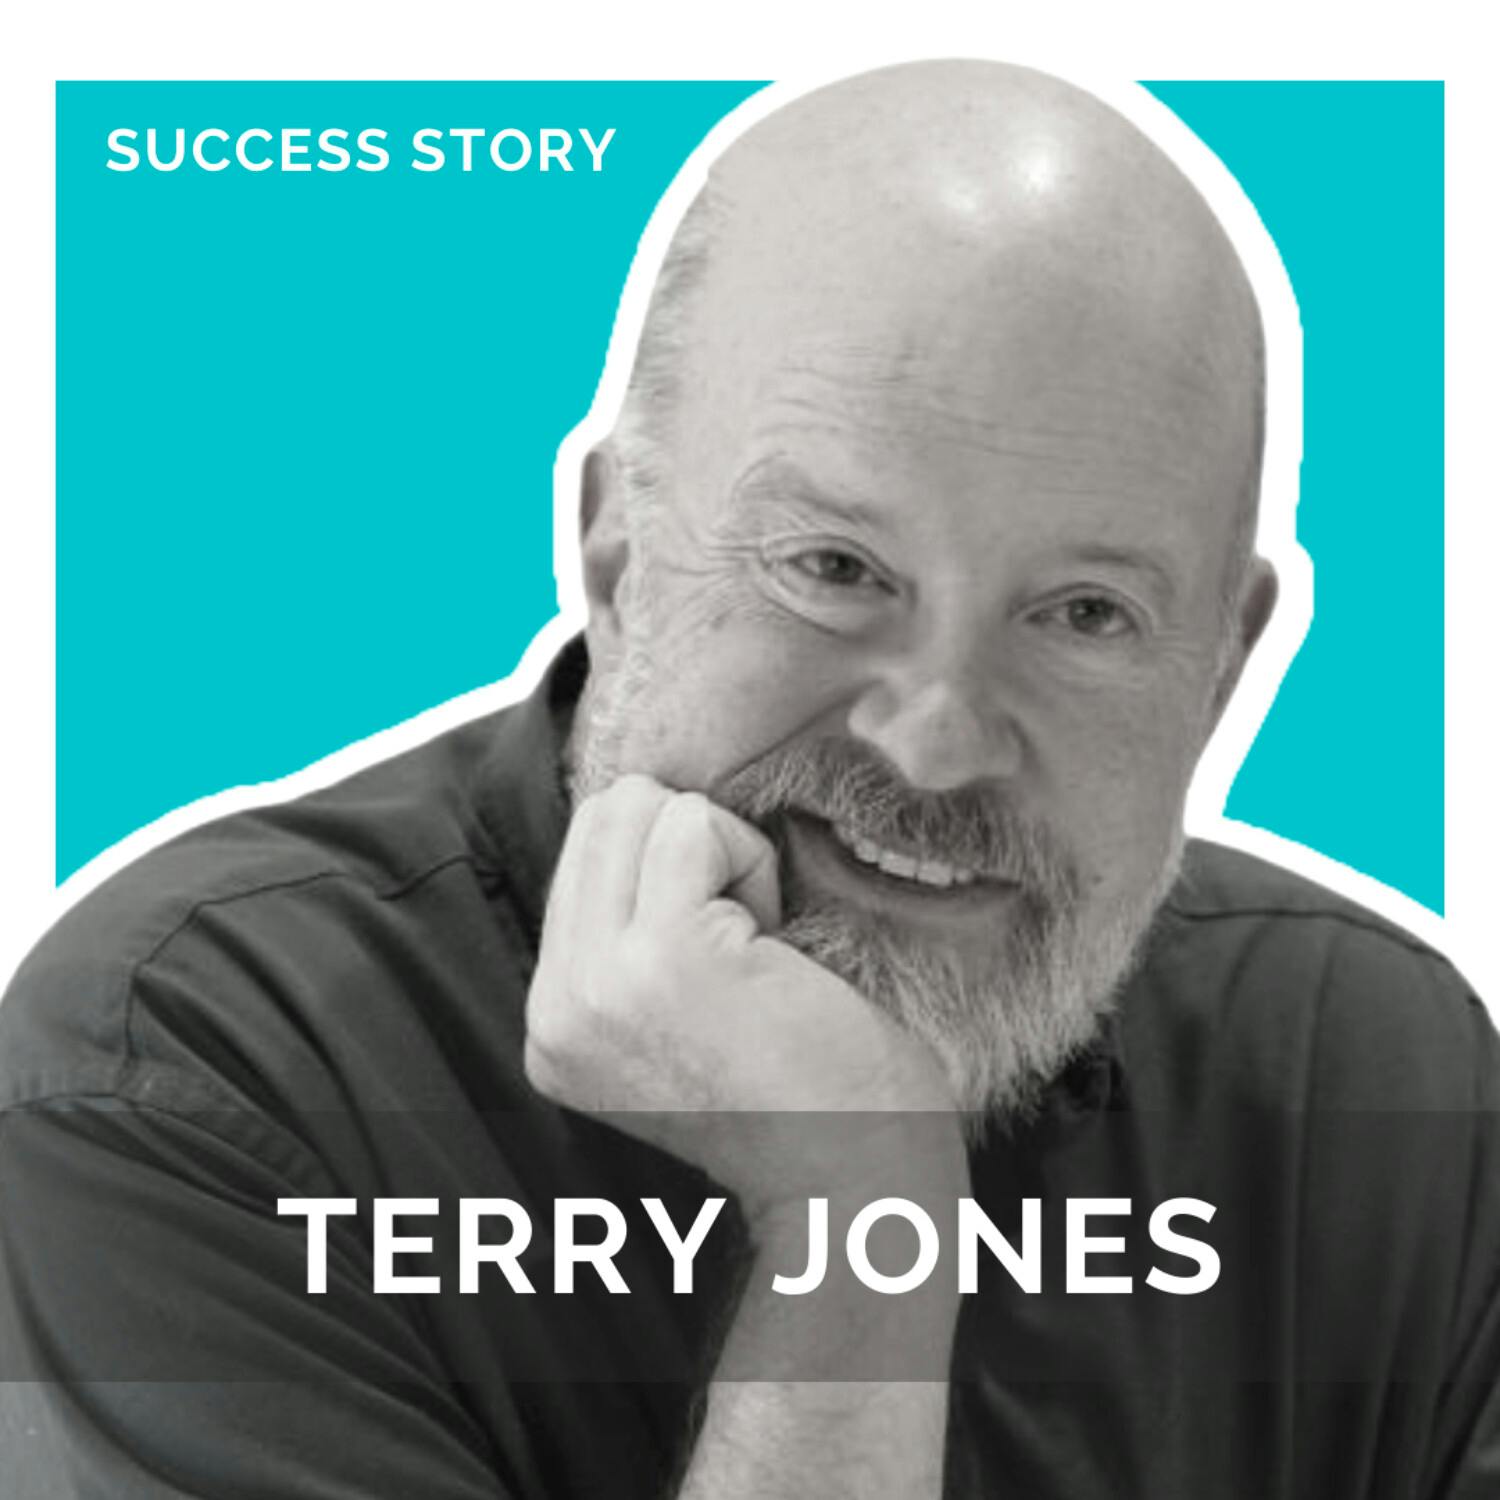 Terry Jones, CEO of Travelocity, Chairman of Kayak.com | Disrupting Existing Industries With Technology